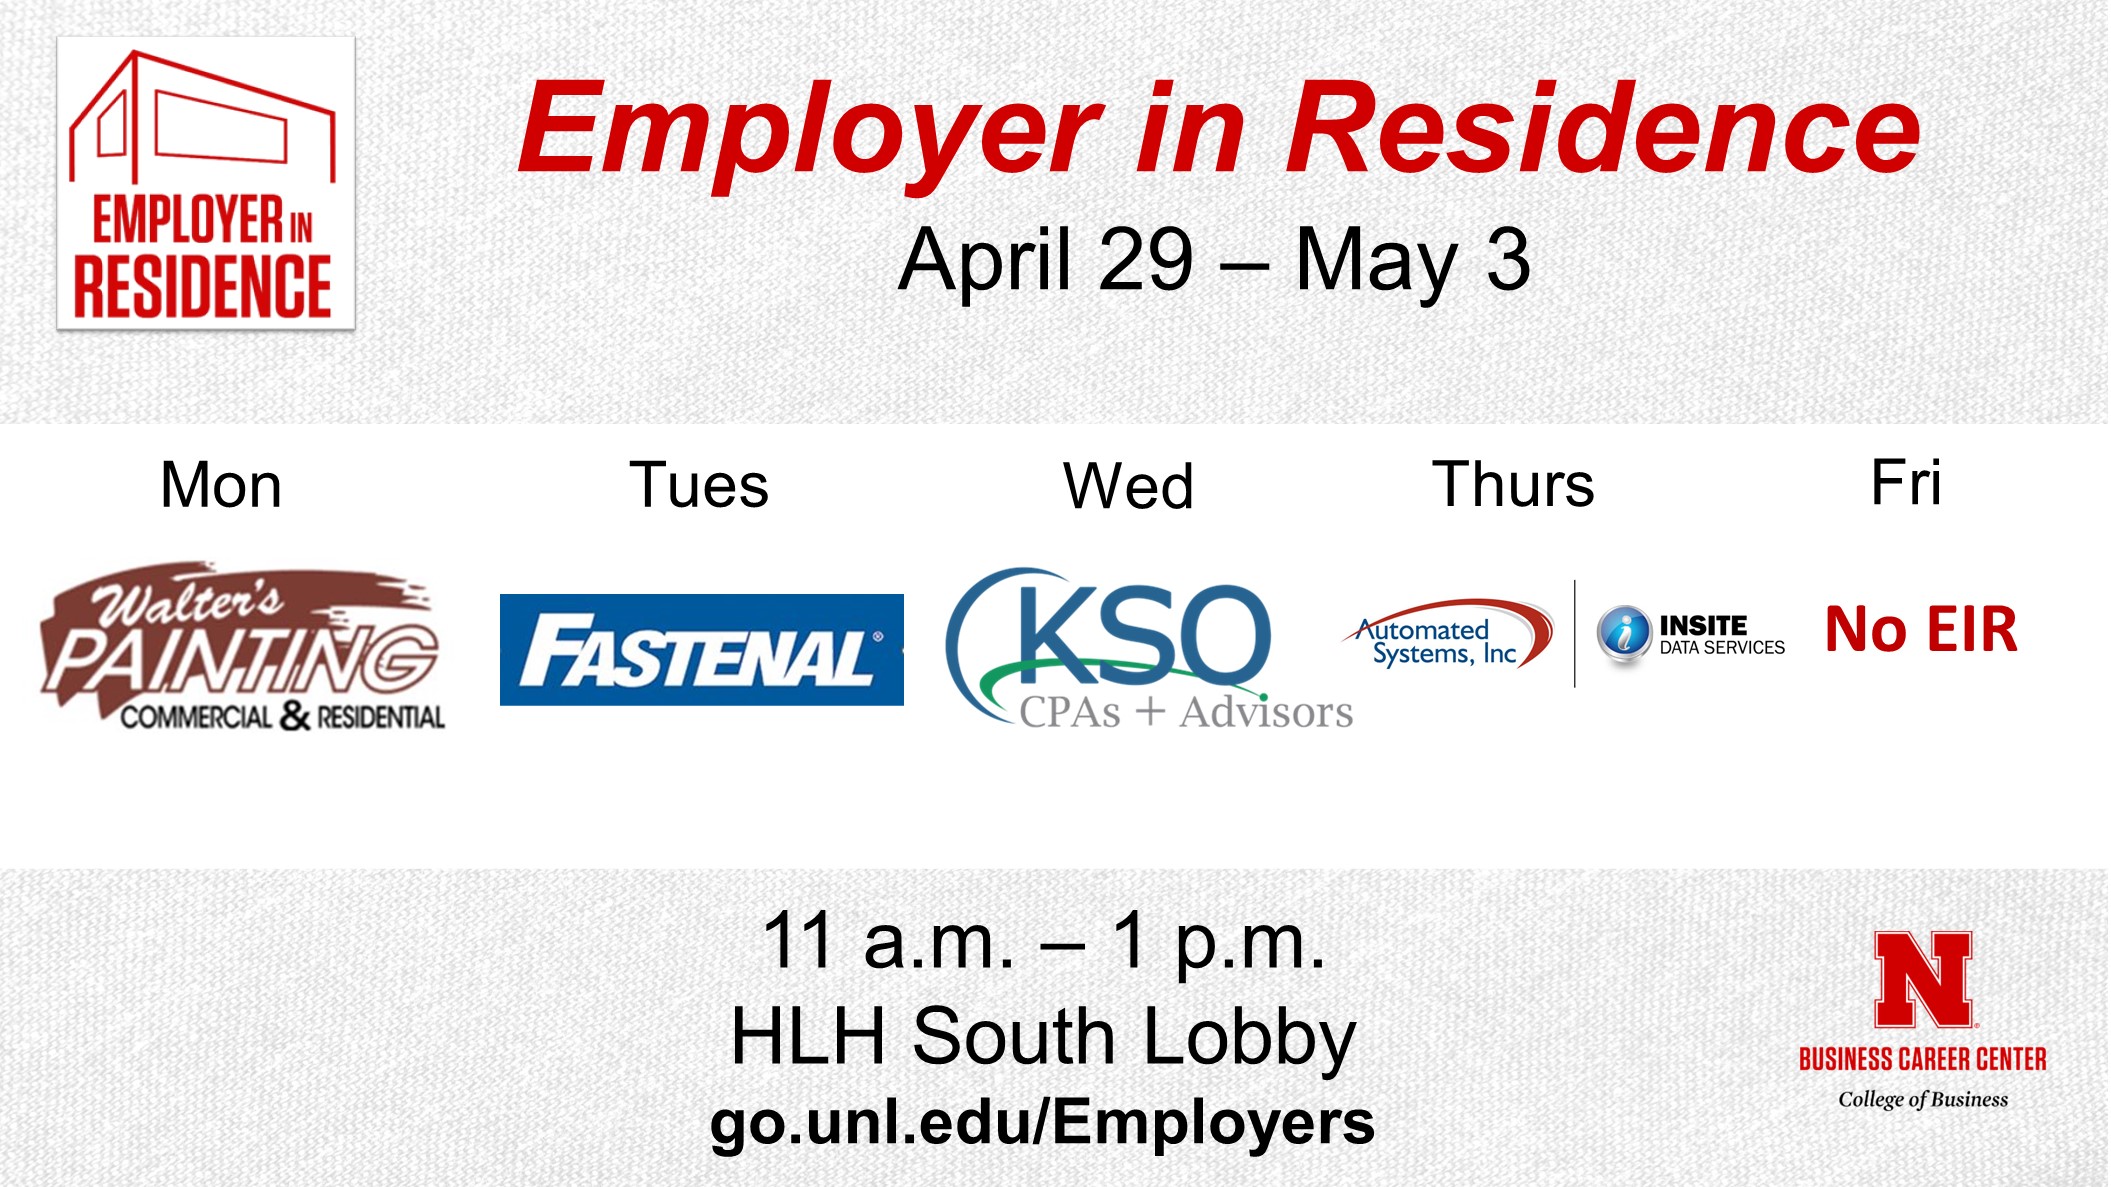 Employer in Residence | Schedule for April 29 - May 3